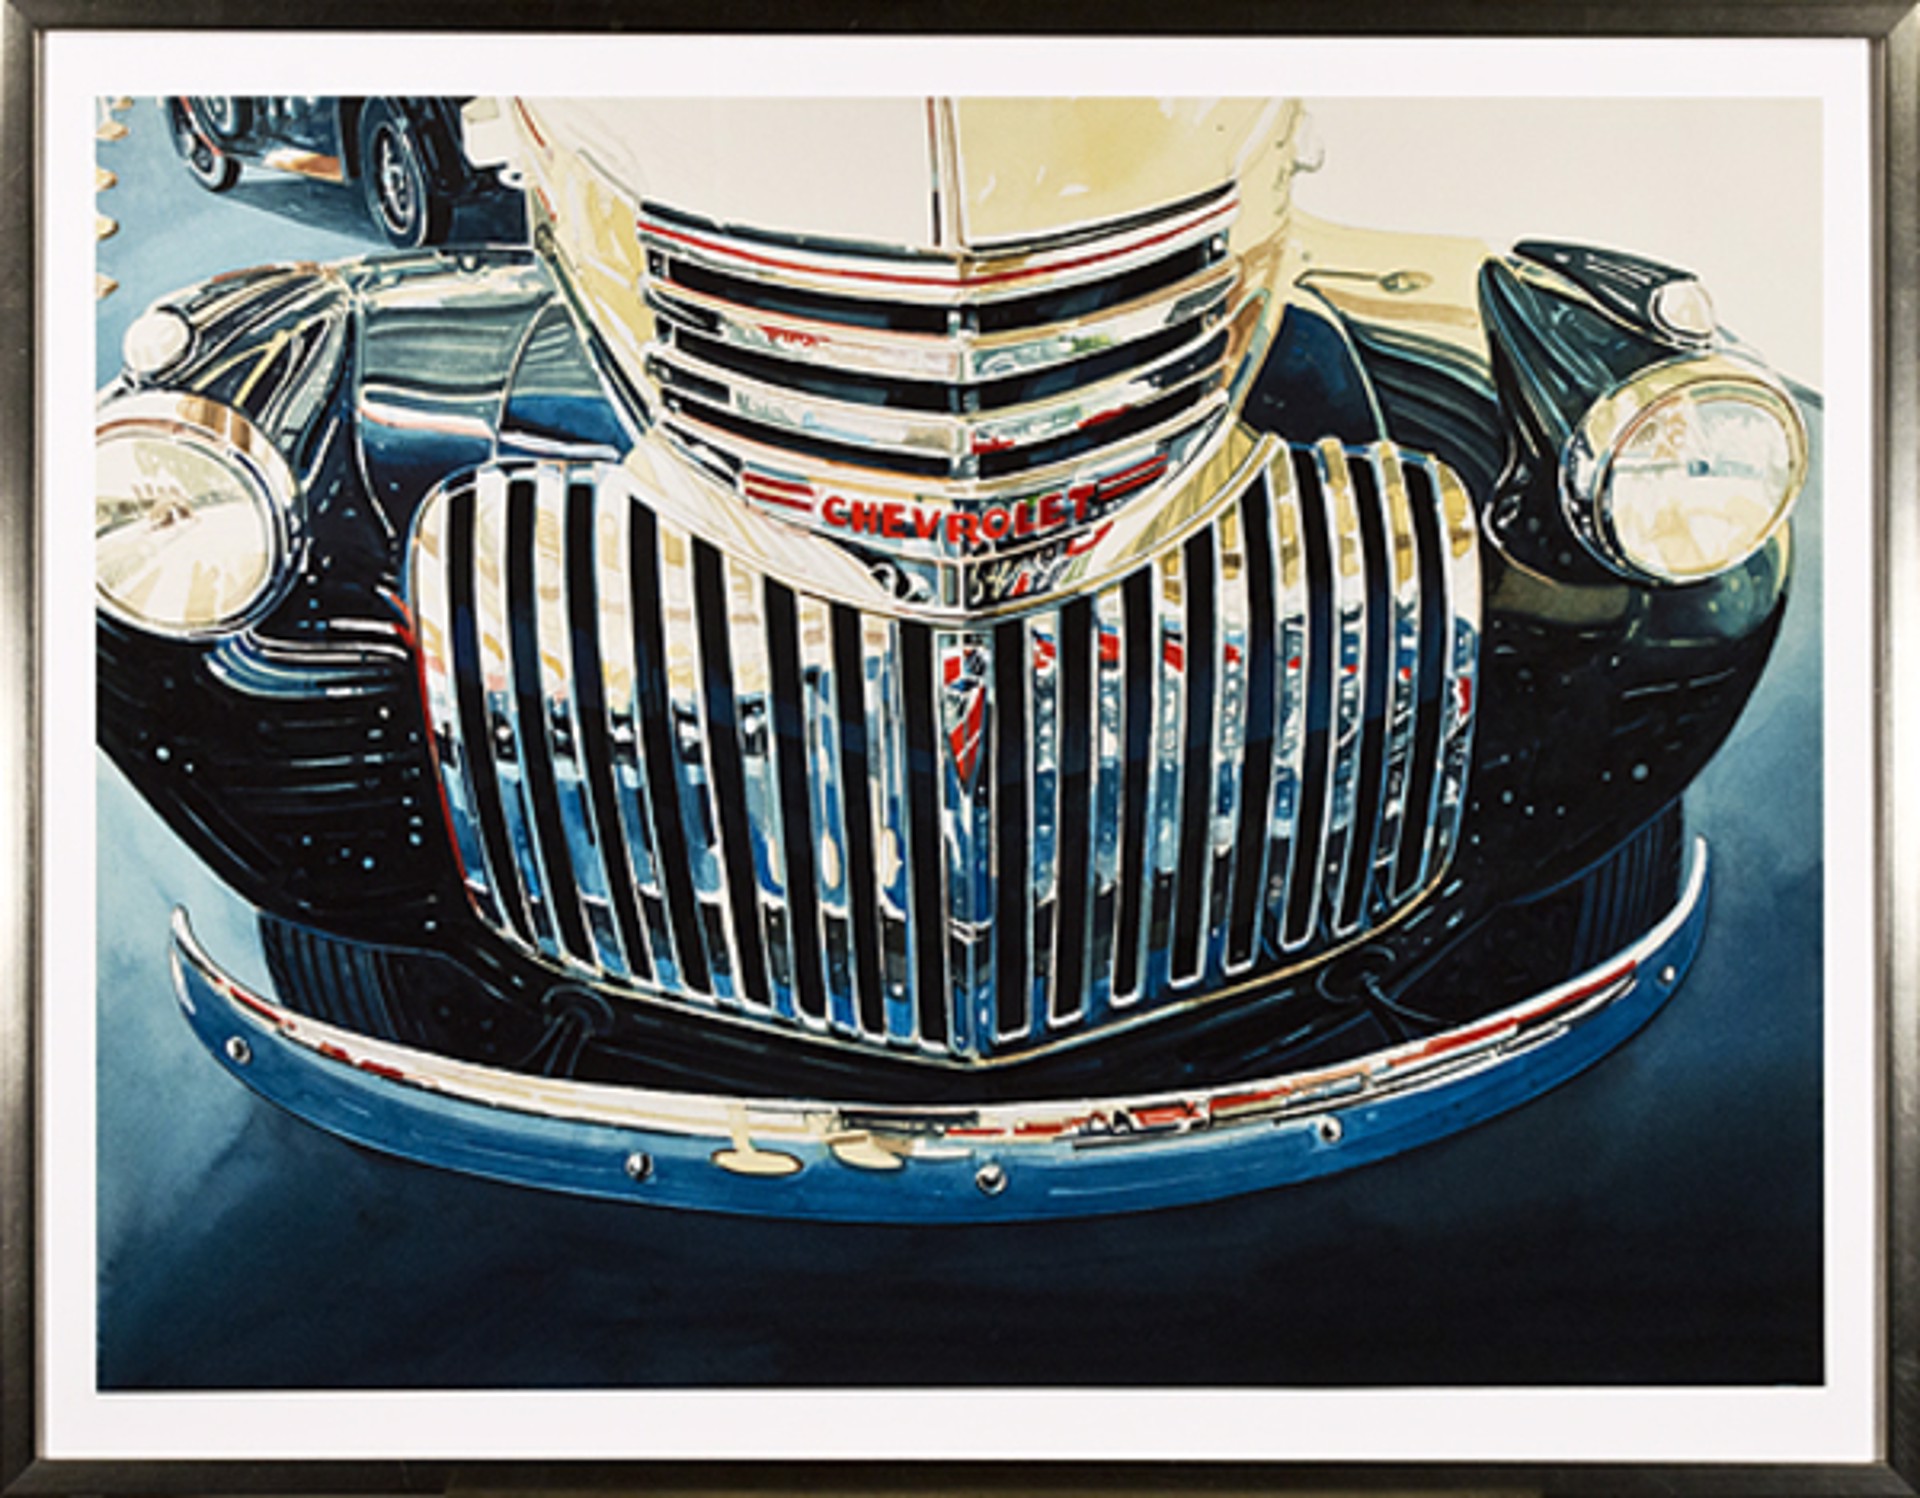 Chevrolet Grille (car) by Bruce McCombs